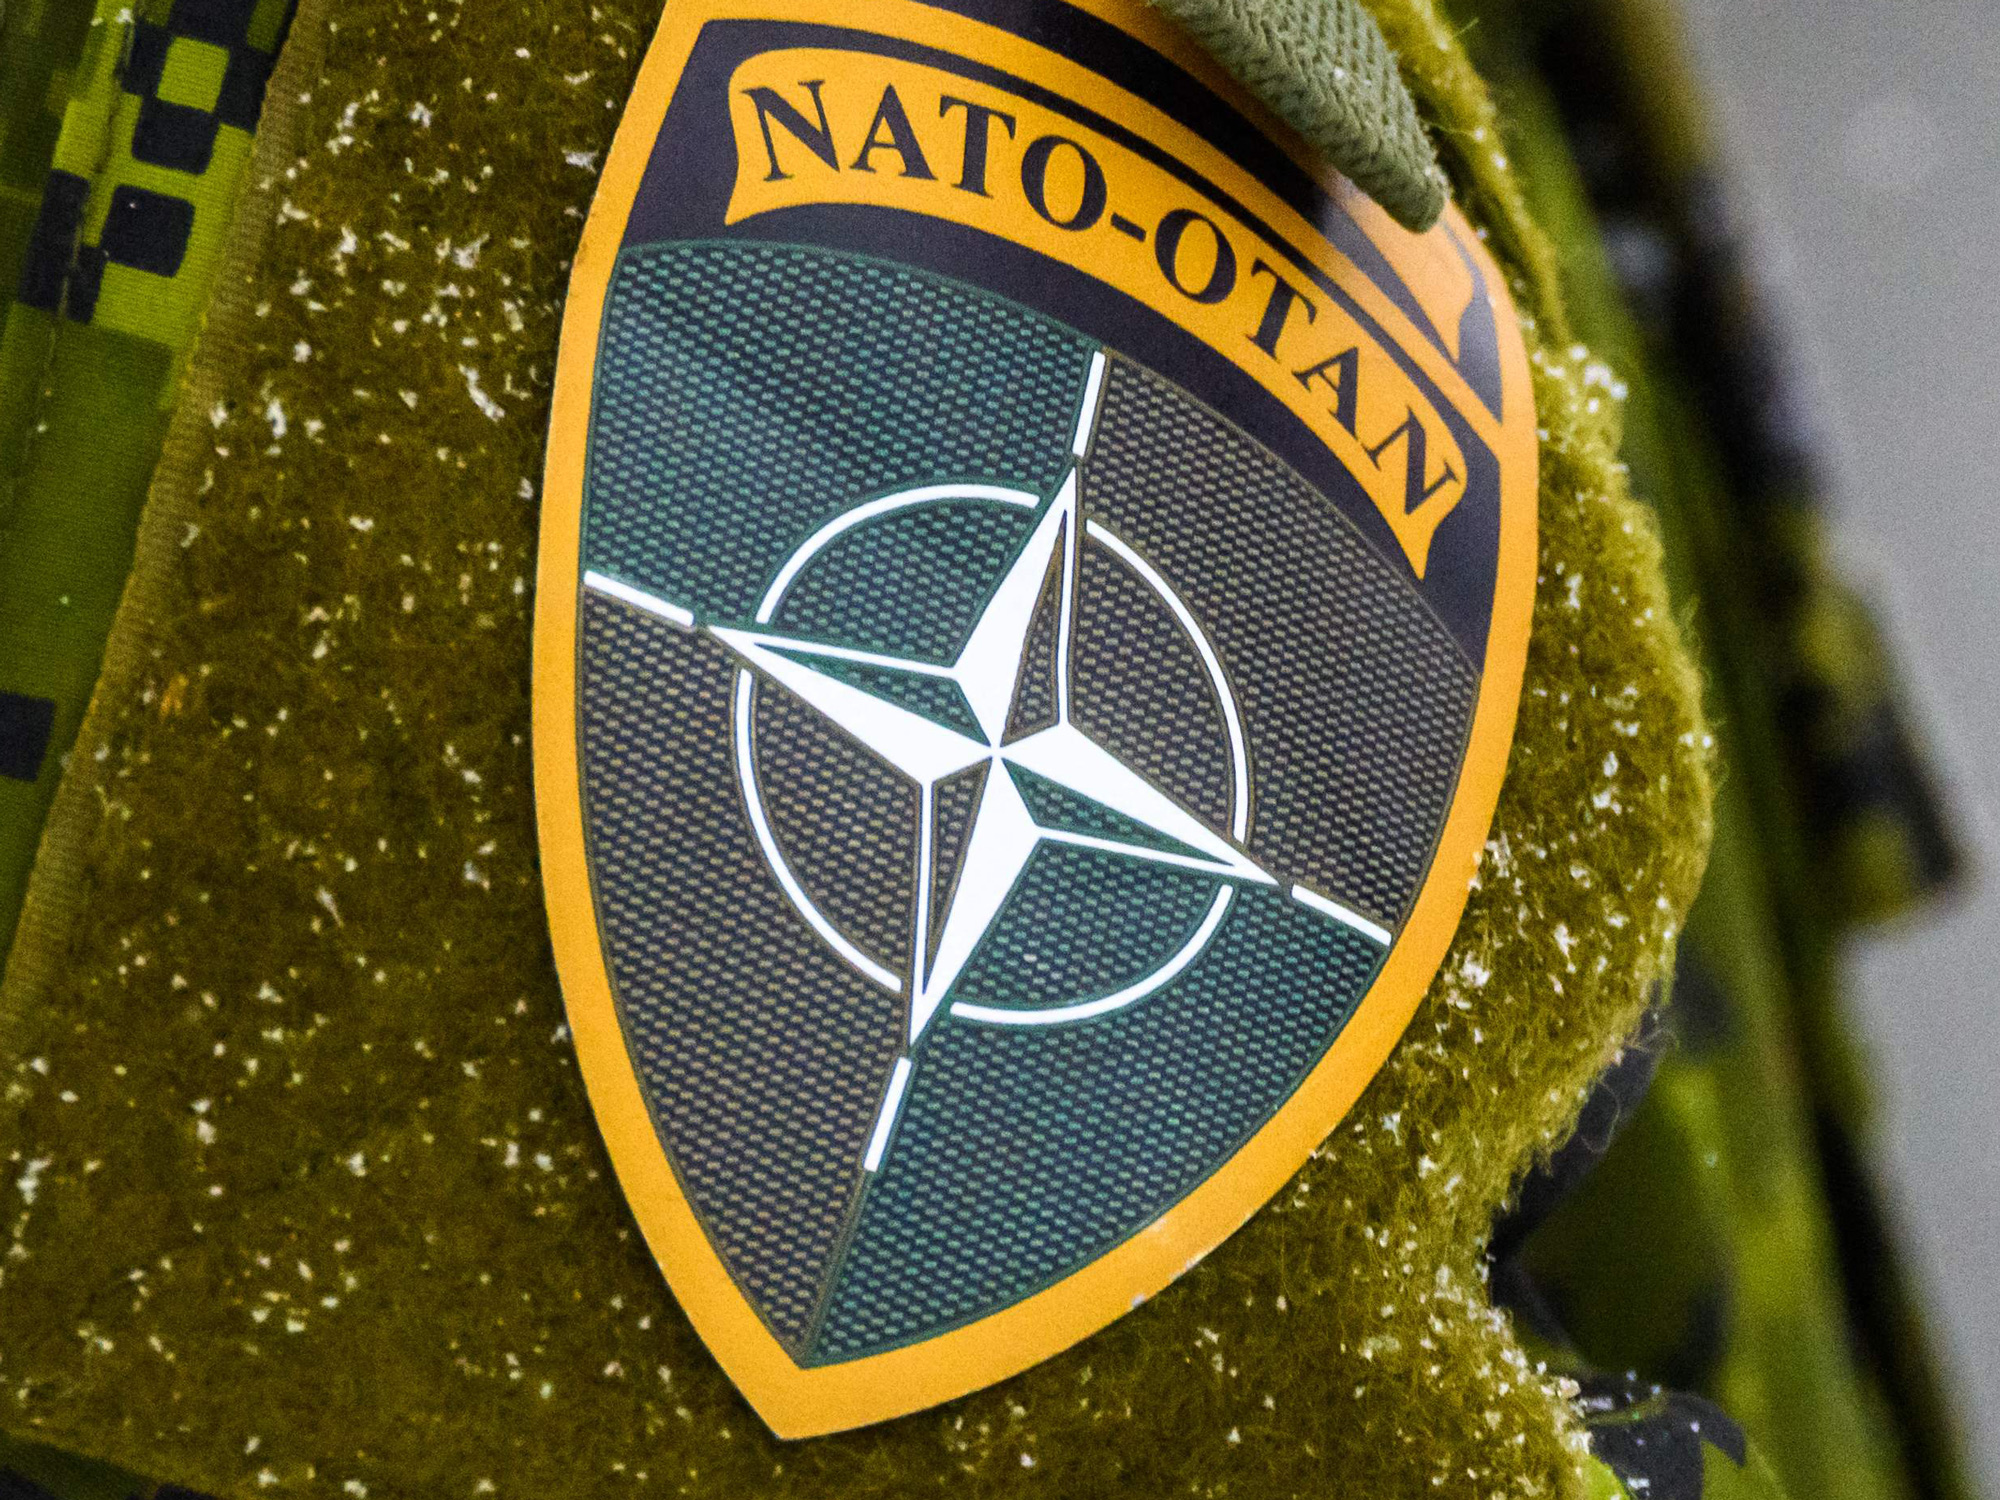 Swedish support for joining NATO&nbsp;has surged after Russia’s invasion of Ukraine.